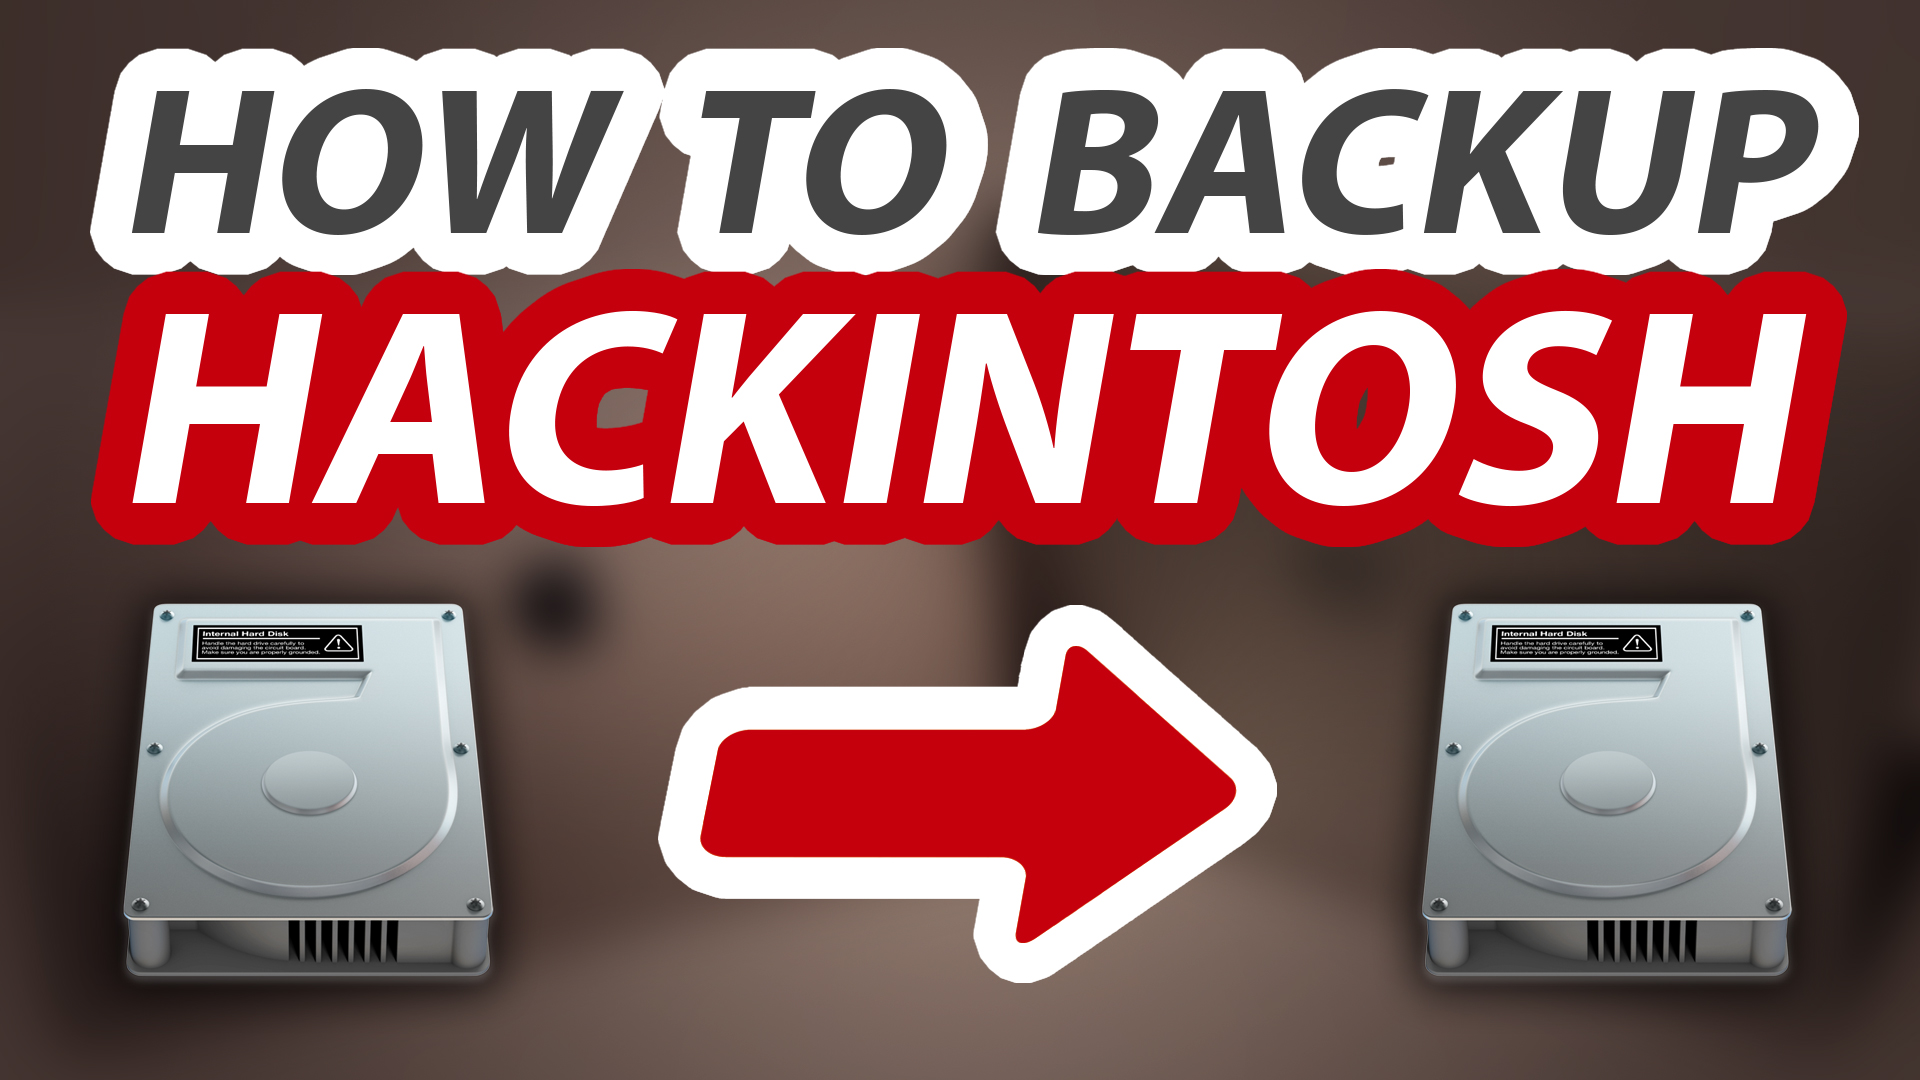 How To Backup Hackintosh Complete Guide Step By Step - Gadget , HD Wallpaper & Backgrounds